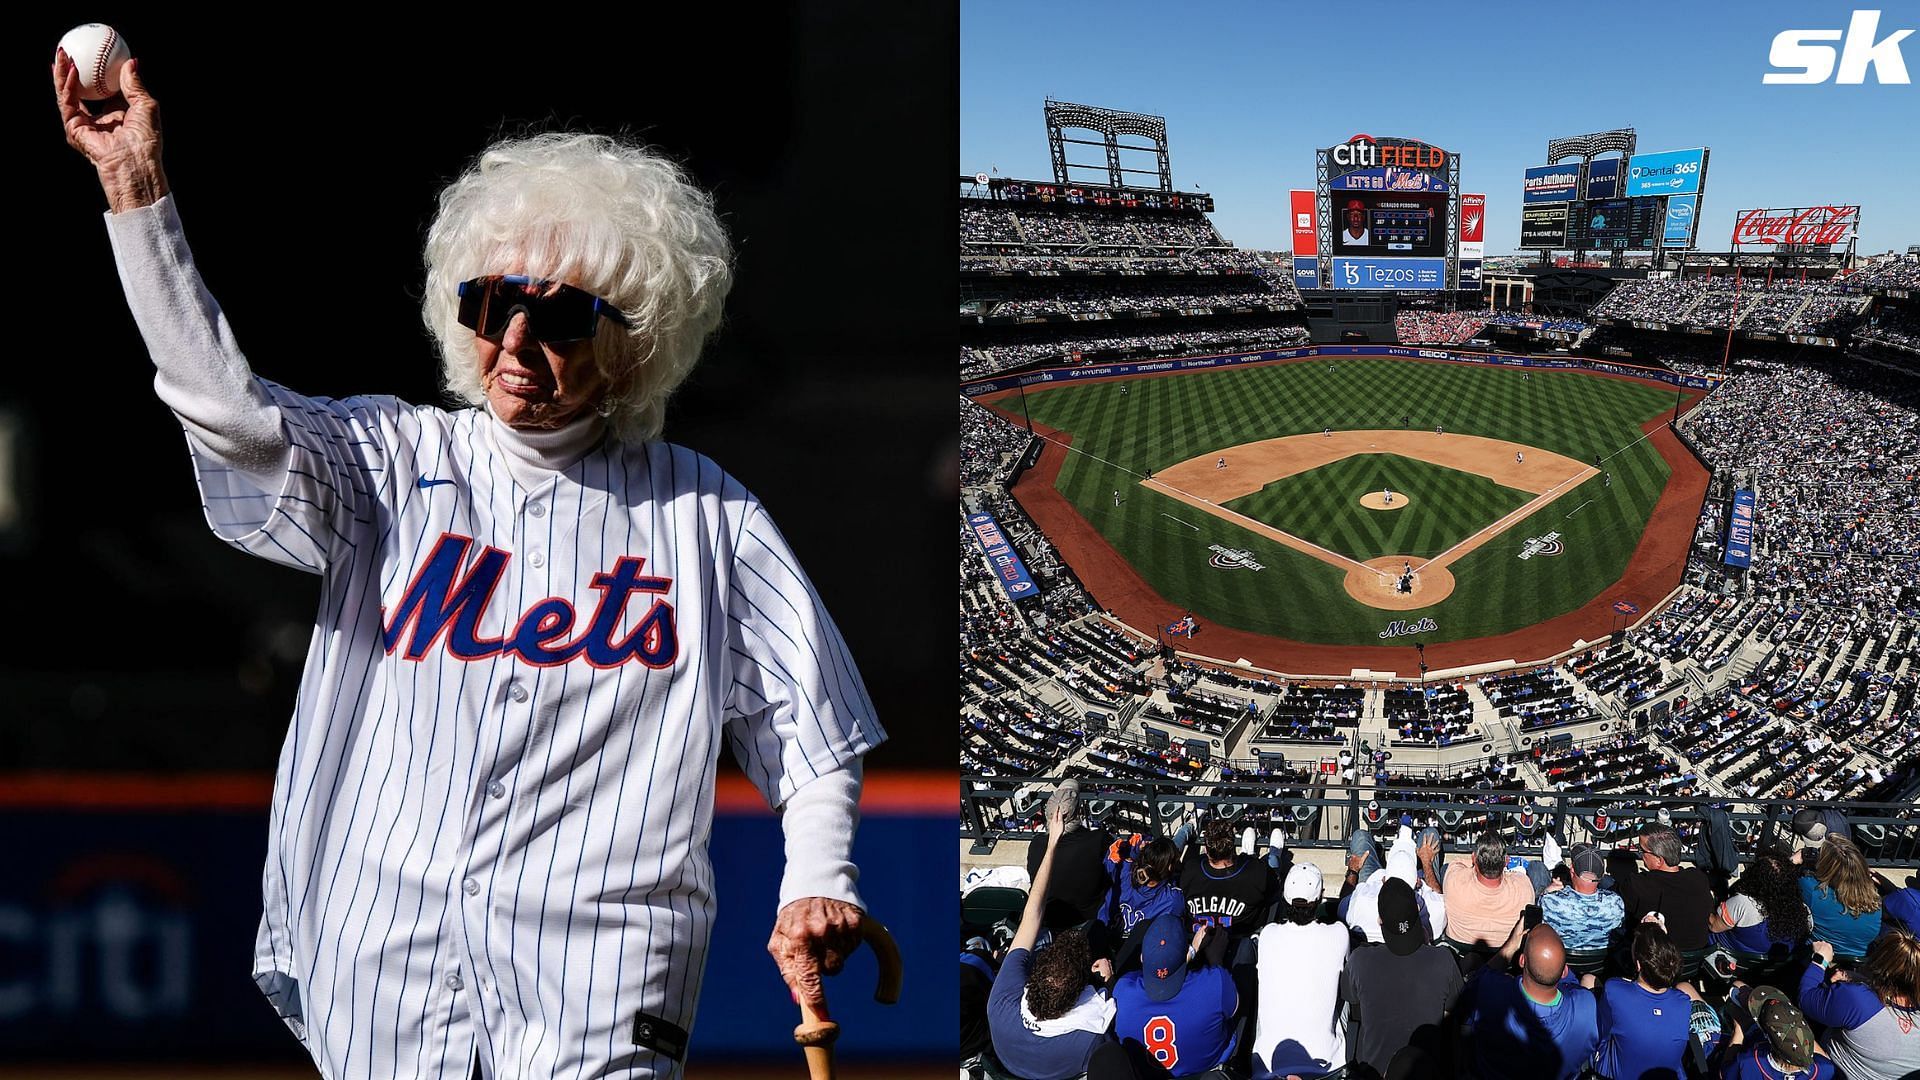 Maybelle Blair at Citi Field in Queens